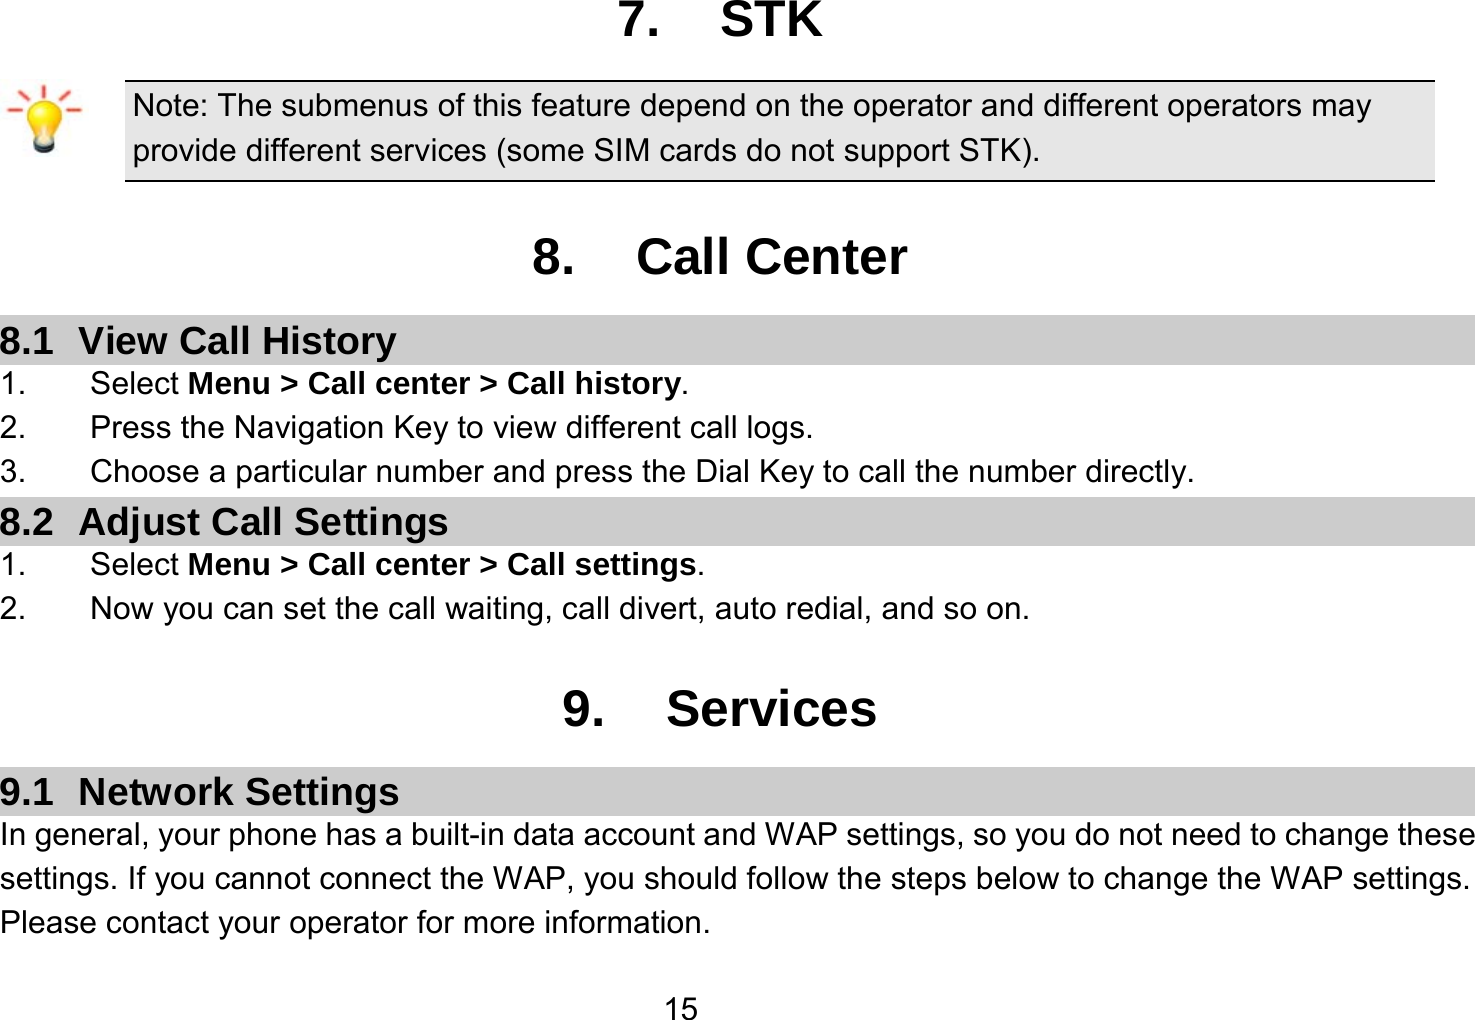   157. STK Note: The submenus of this feature depend on the operator and different operators may provide different services (some SIM cards do not support STK).  8. Call Center 8.1  View Call History 1.    Select Menu &gt; Call center &gt; Call history. 2.        Press the Navigation Key to view different call logs. 3.    Choose a particular number and press the Dial Key to call the number directly. 8.2  Adjust Call Settings 1.    Select Menu &gt; Call center &gt; Call settings. 2.    Now you can set the call waiting, call divert, auto redial, and so on.  9. Services 9.1 Network Settings In general, your phone has a built-in data account and WAP settings, so you do not need to change these settings. If you cannot connect the WAP, you should follow the steps below to change the WAP settings. Please contact your operator for more information. 